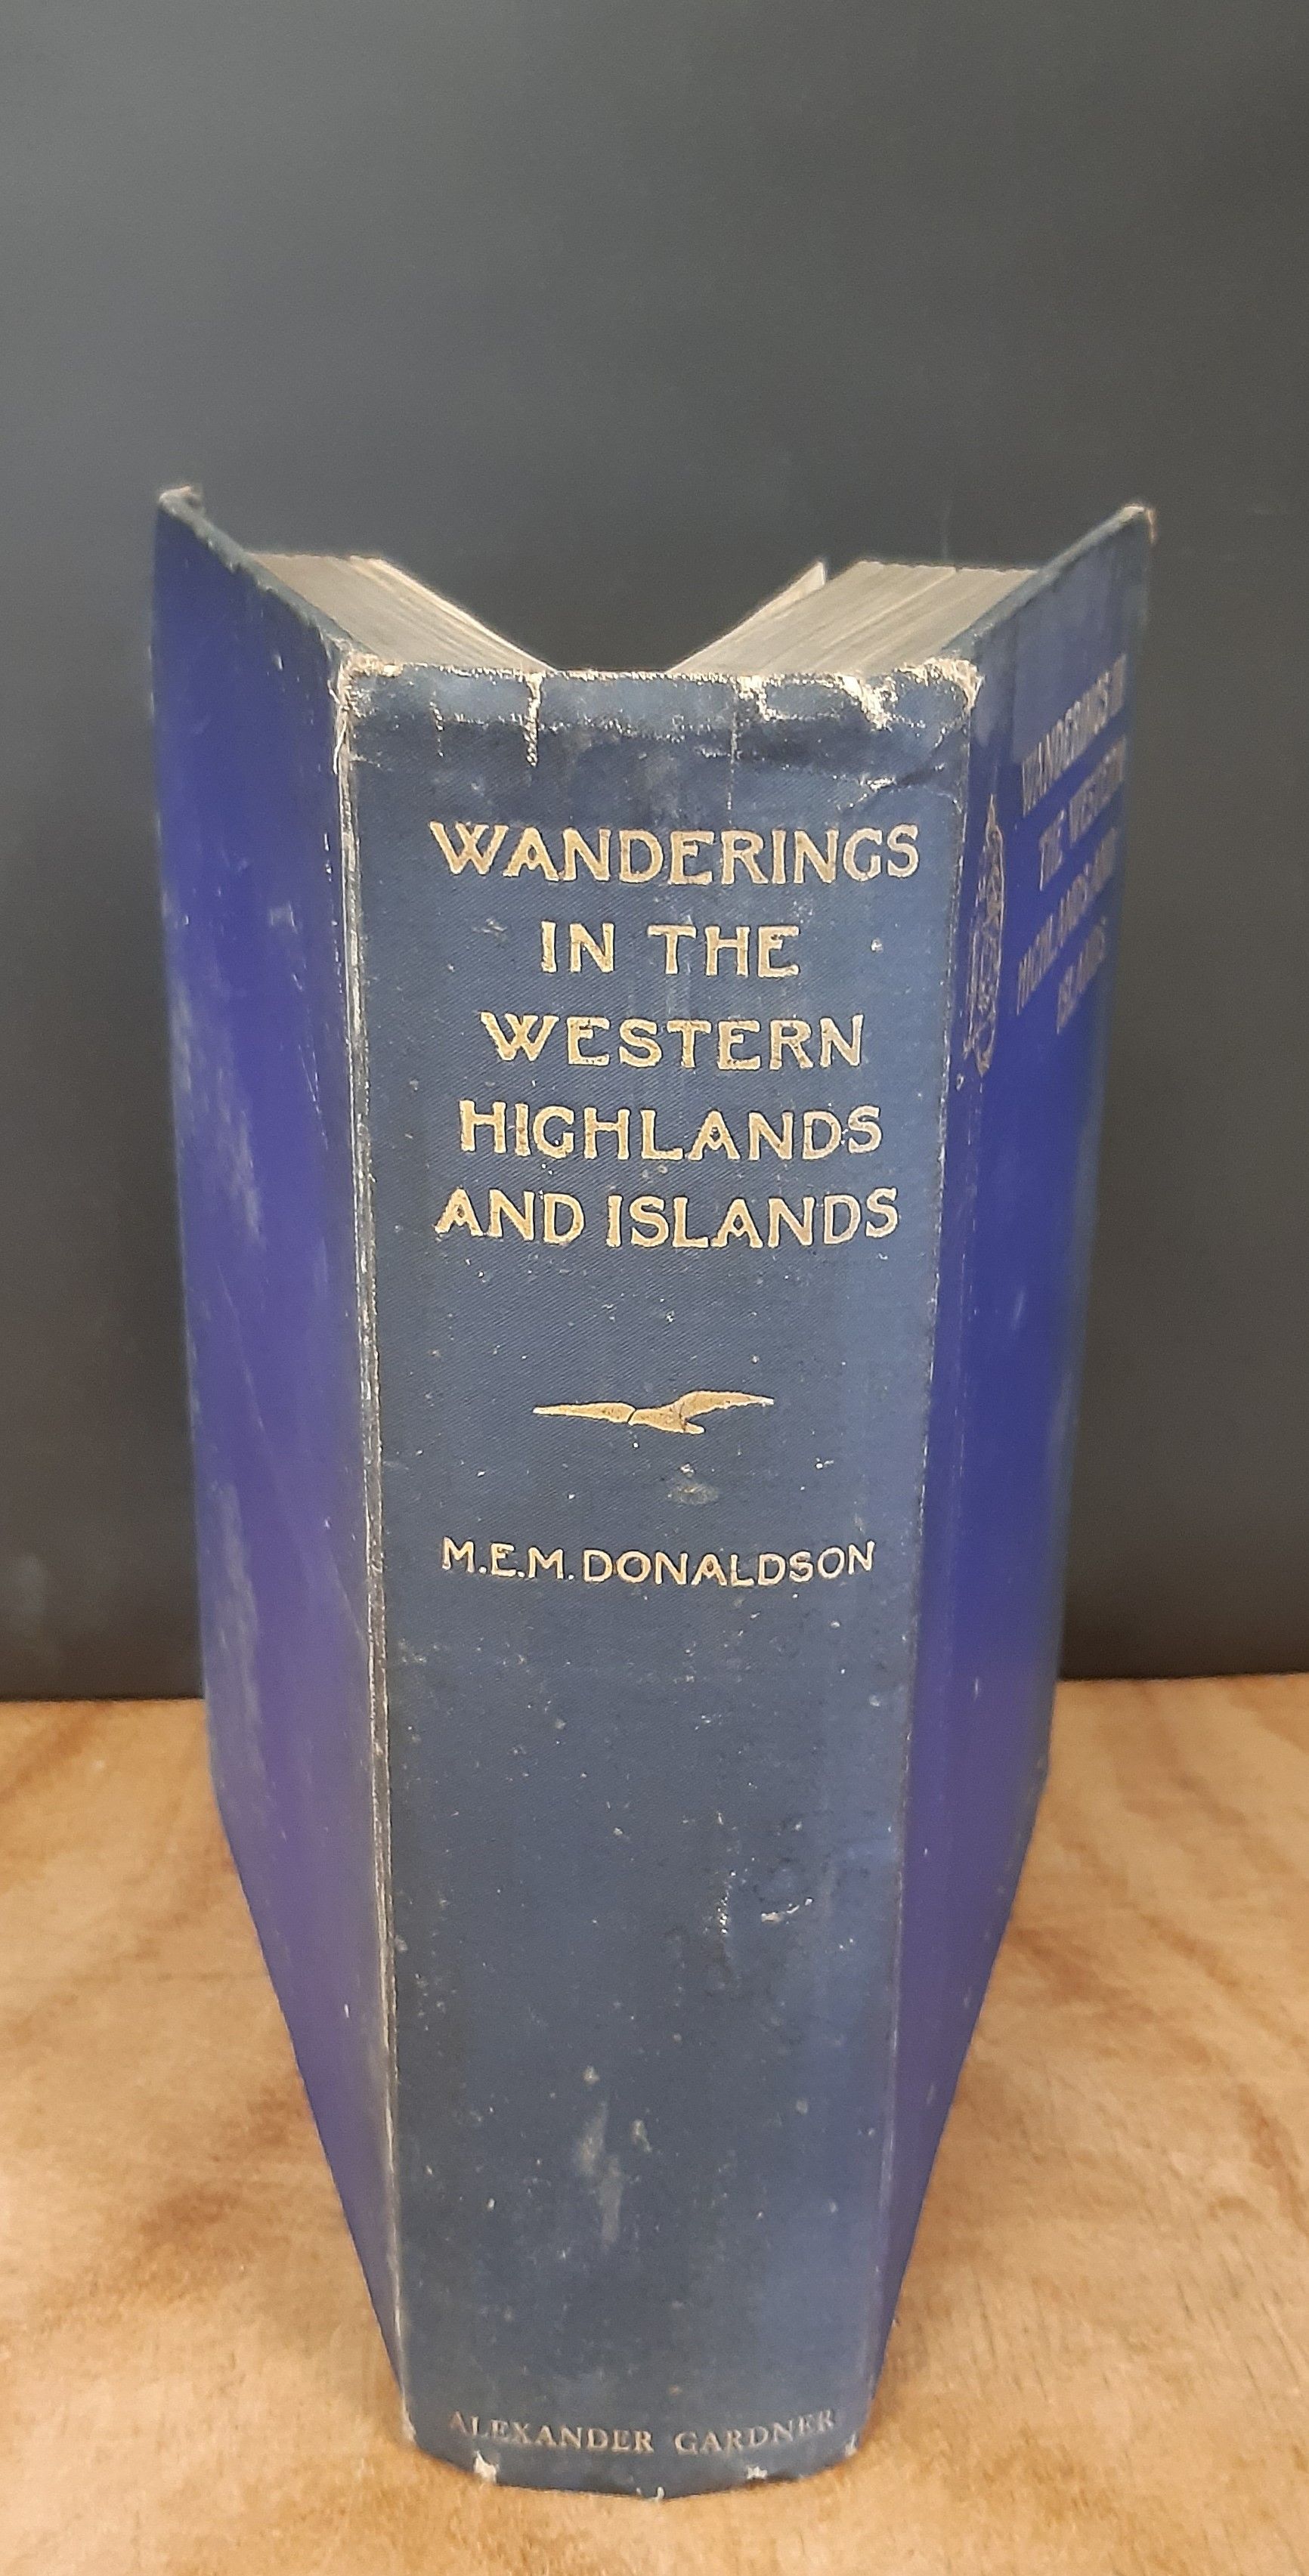 Donaldson [M.E.M], Wanderings in the Western Highlands and Islands, published by Alexander